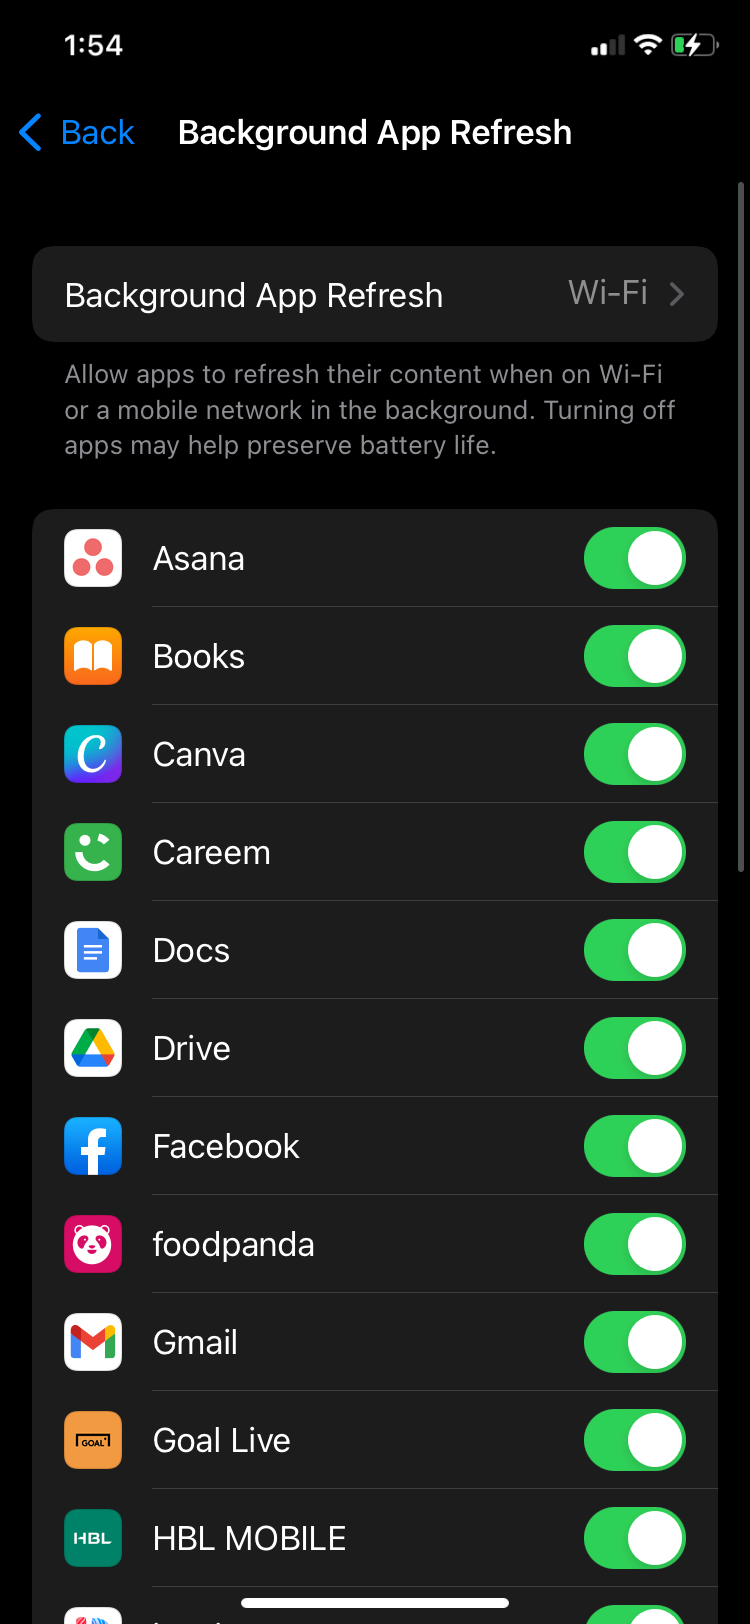 background app refresh toggles for every app